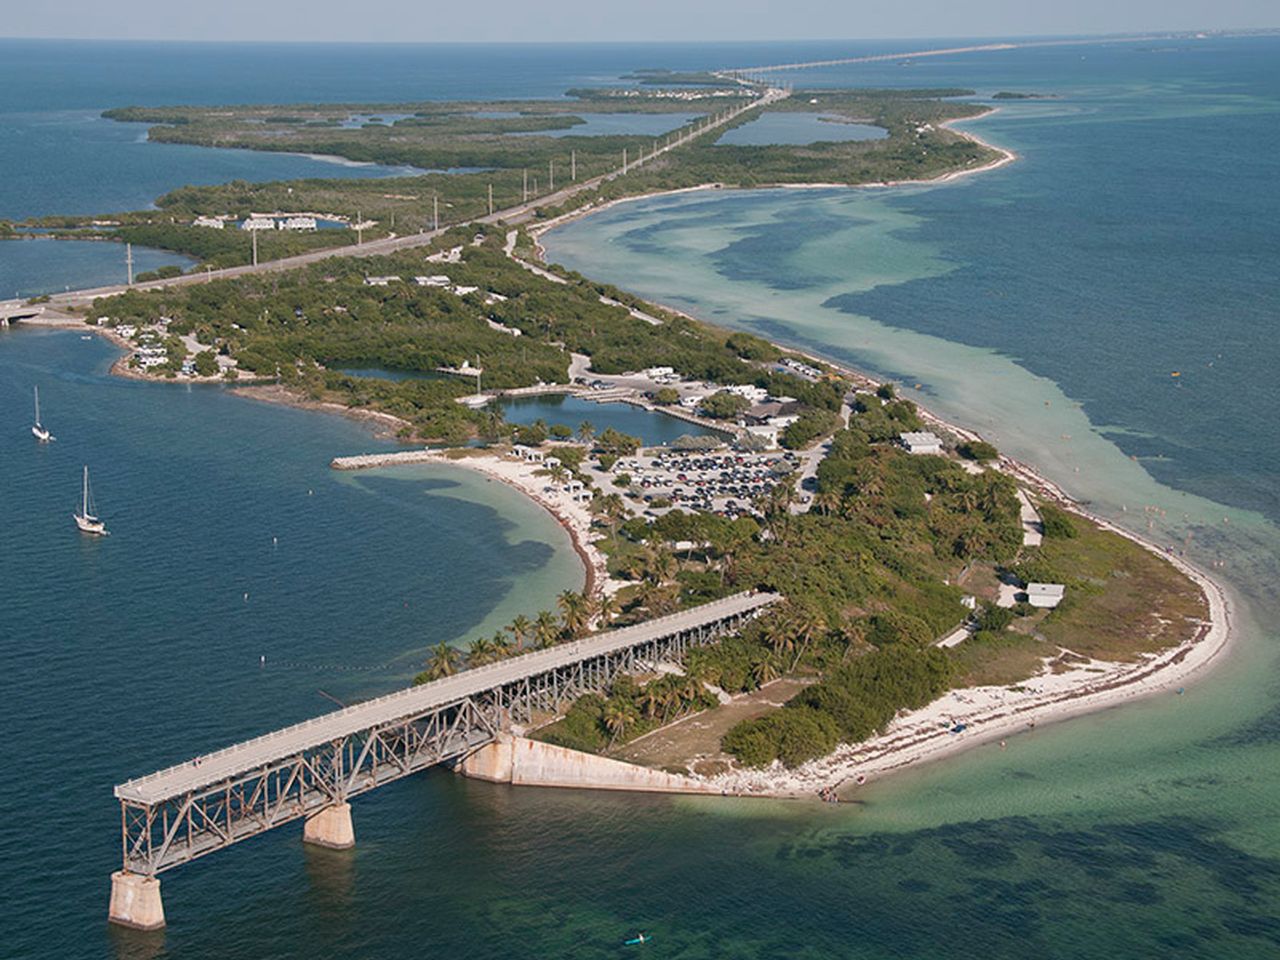 In the Lower Keys, the 524-acre Bahia Honda State Park, with three beaches, has reopened its mile-long Sandspur Beach on the park's north side after completing a full $2.96 million restoration.